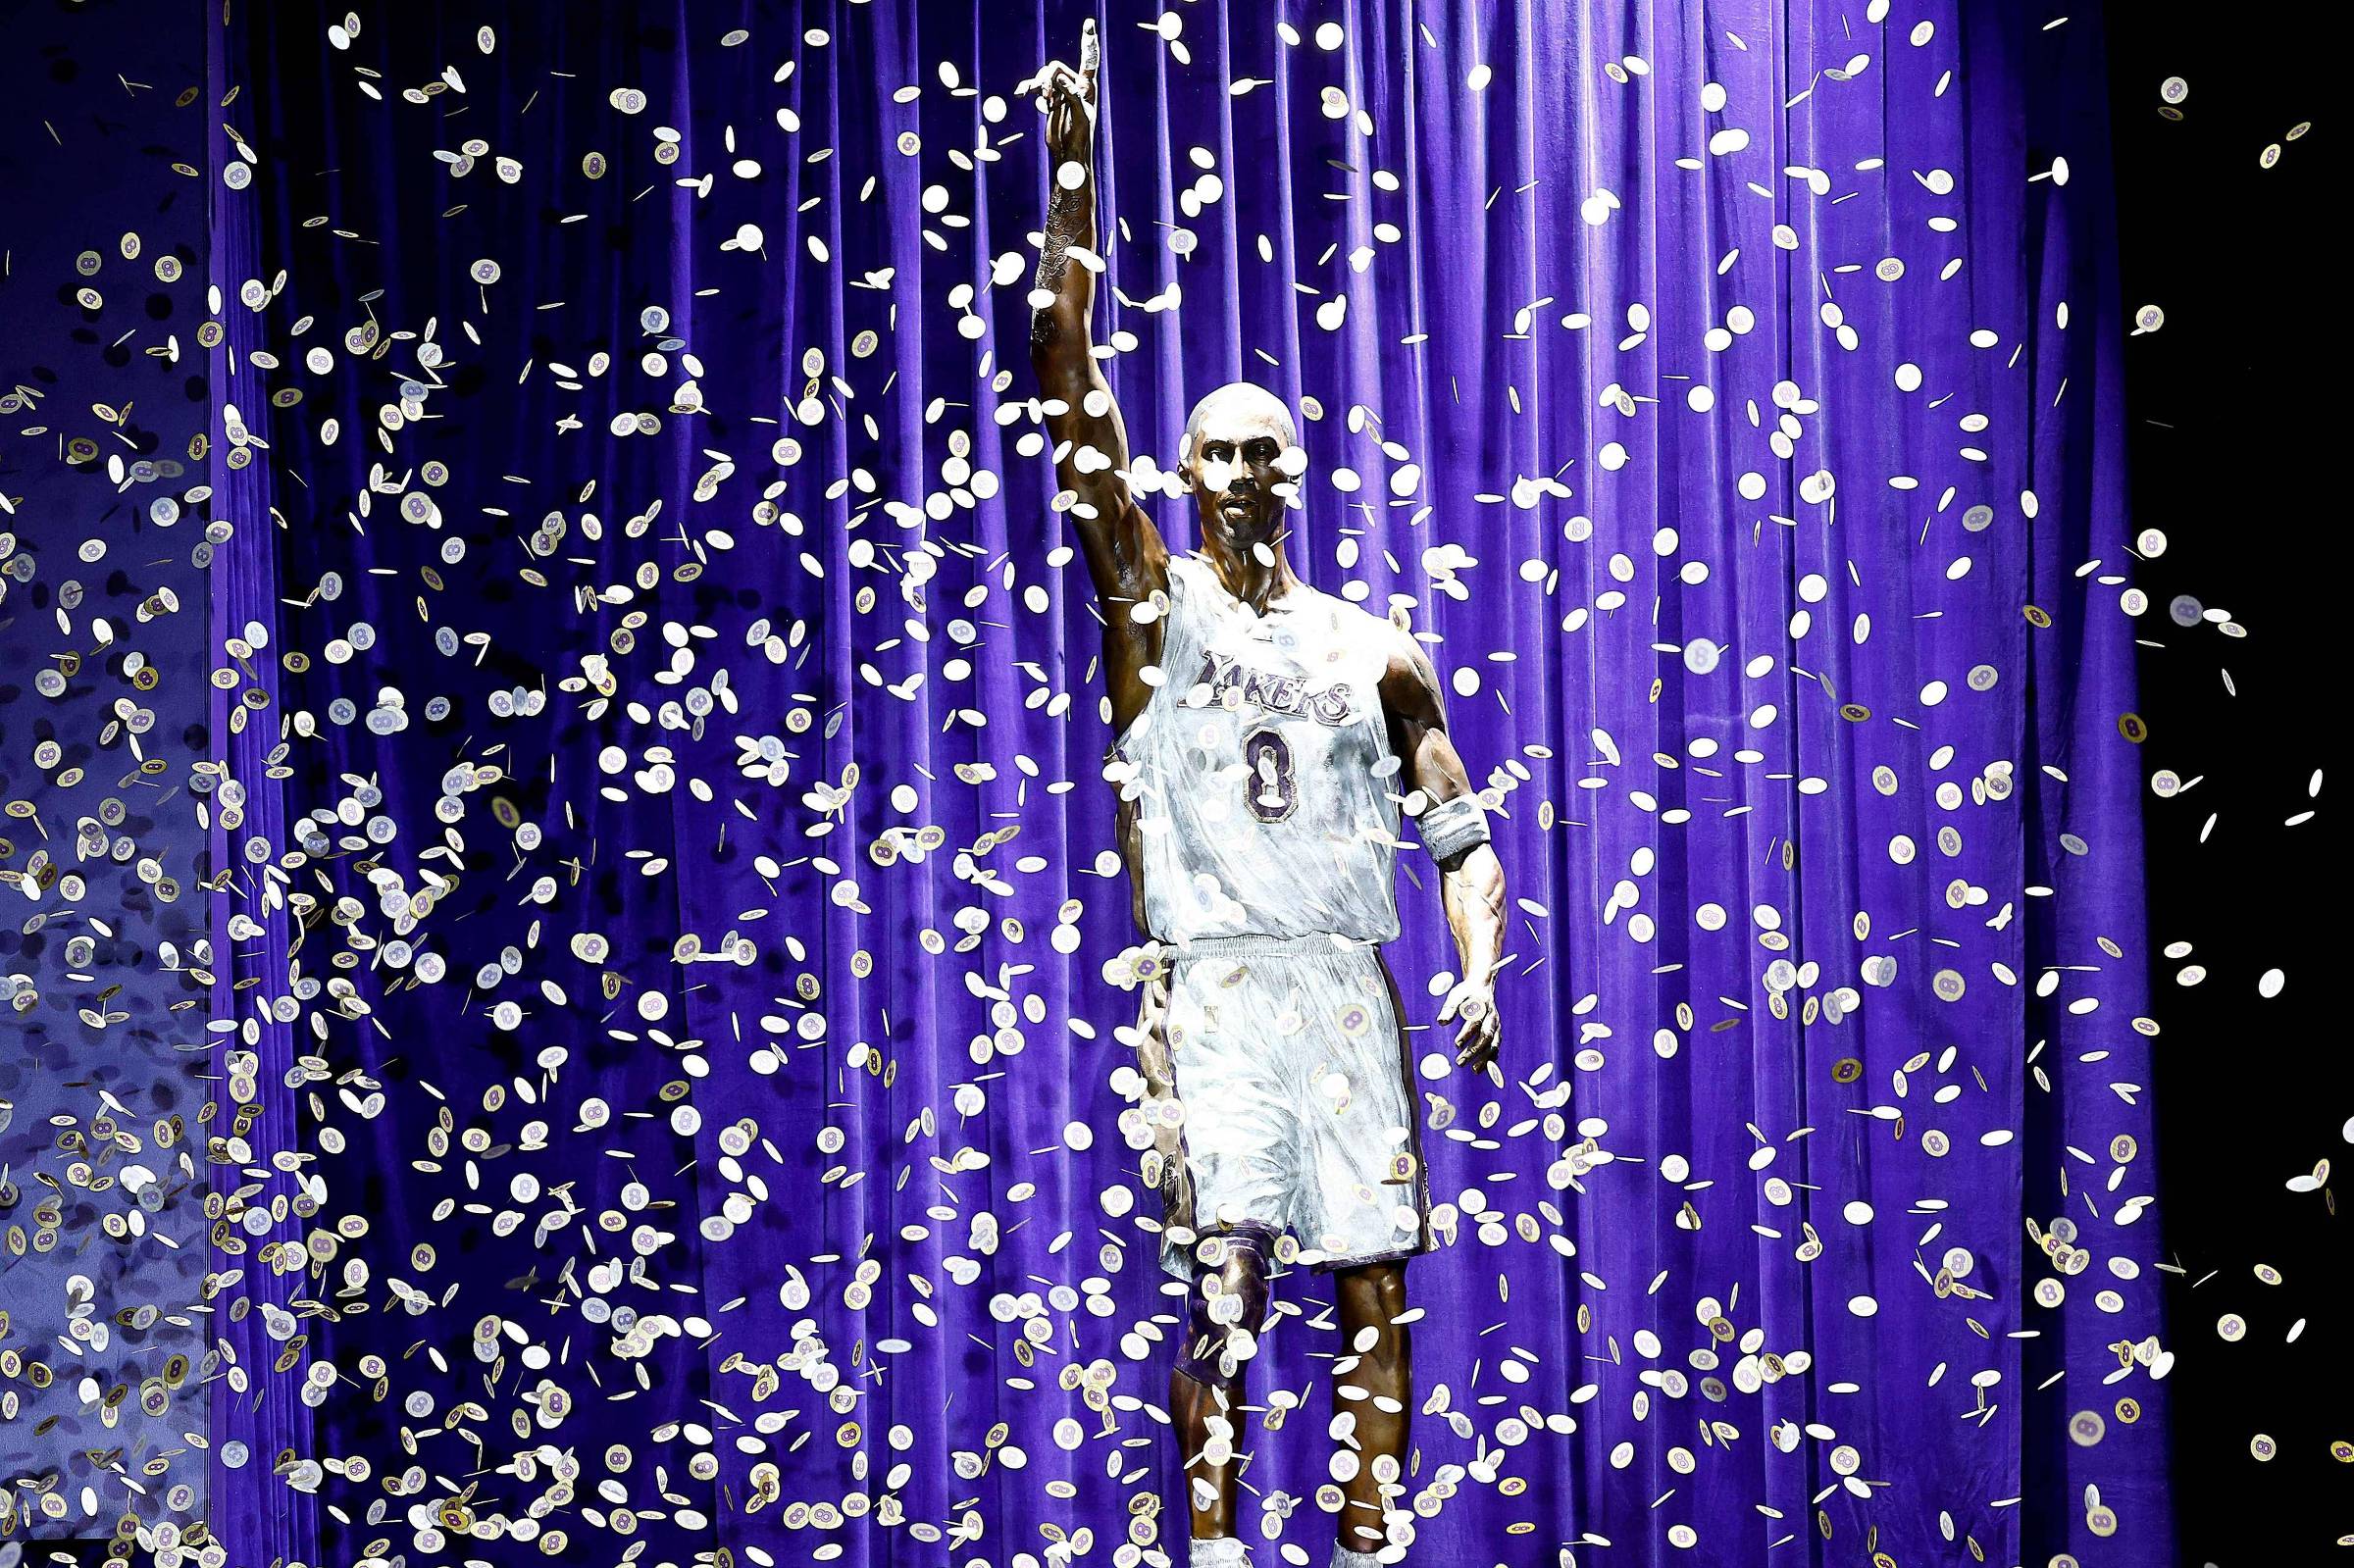 Kobe, honored with statue, continues to exert great influence on the NBA